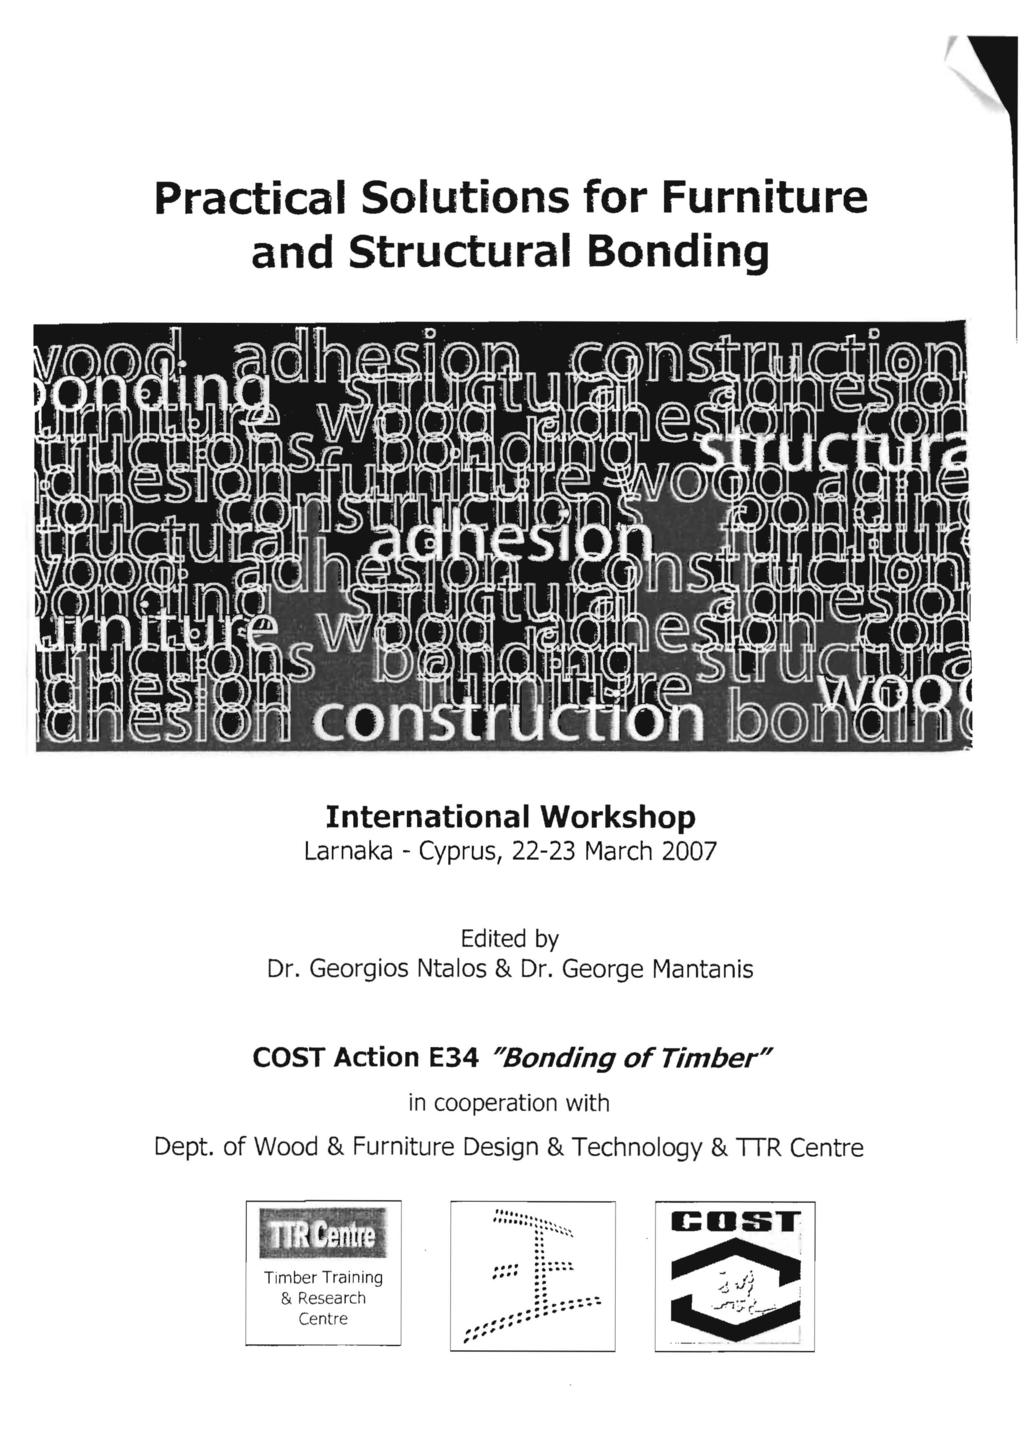 Practical Solutions for Furniture and Structural Bonding International Workshop Larnaka - Cyprus, 22-23 March 2007 Edited by Dr. Georgios Ntalos & Dr.